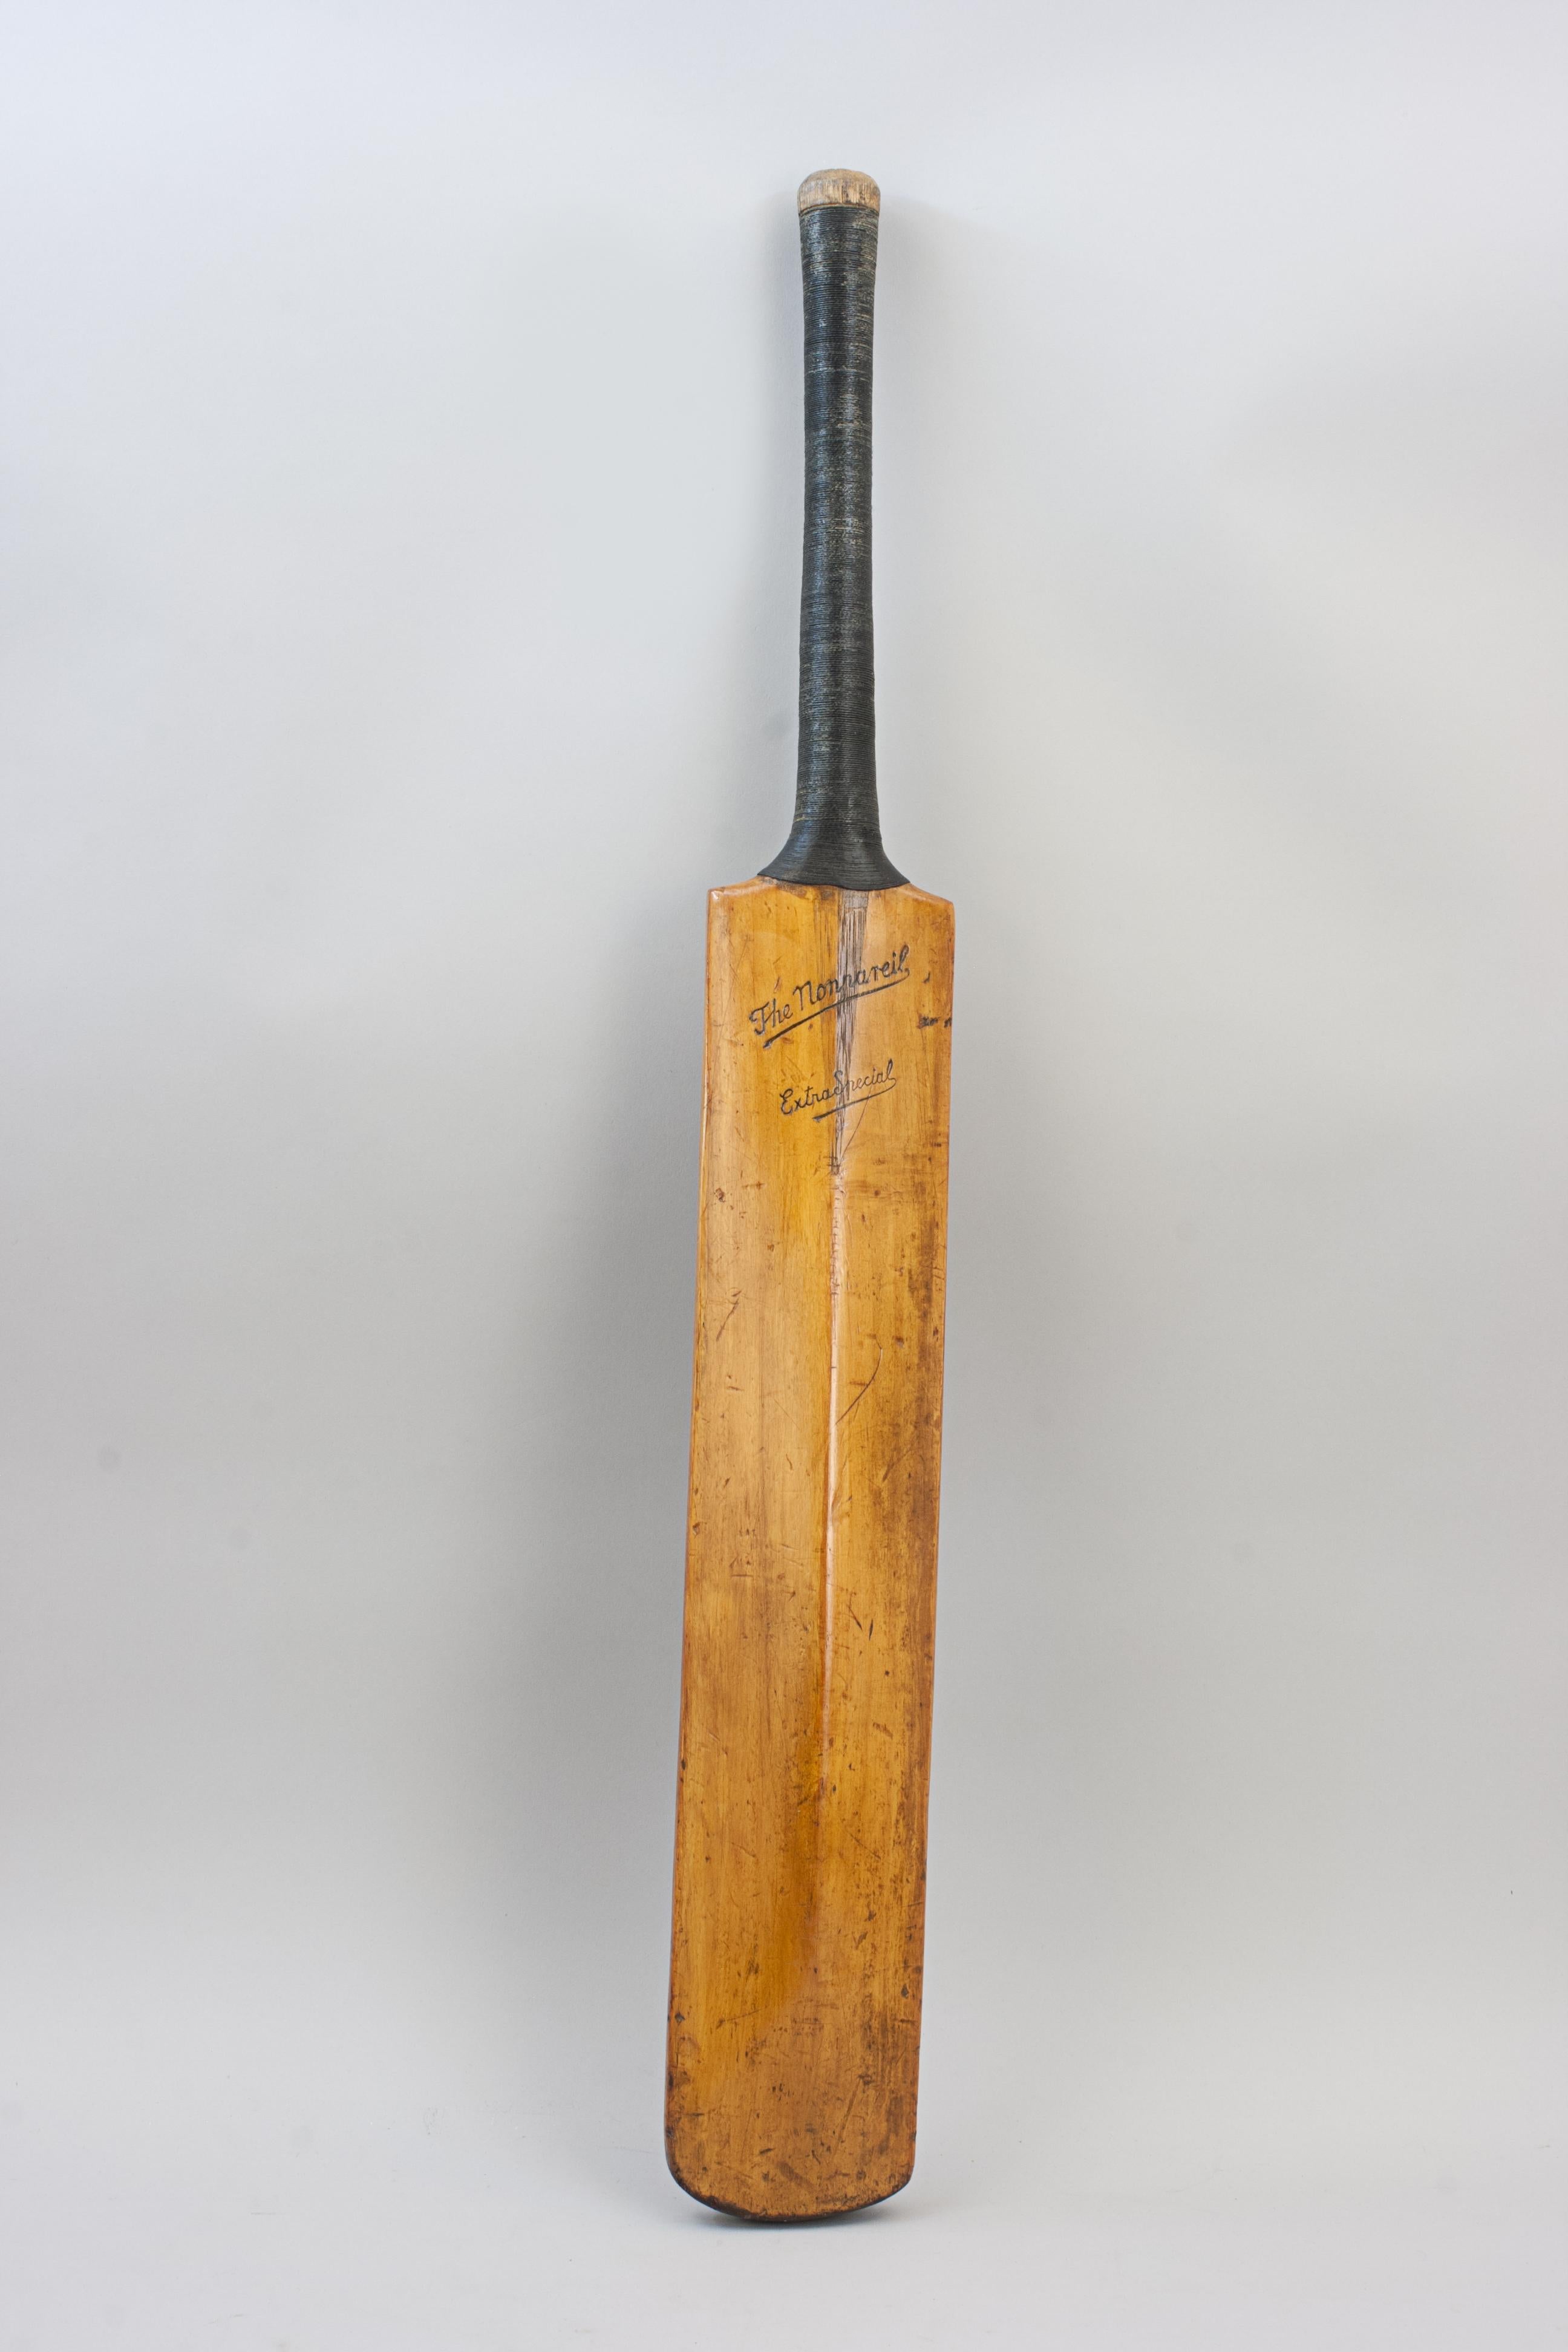 Juniors Willow Cricket Bat.
A good quality willow cricket bat 'The Nonpareil'. The two shoulders stamped 'W.J. Breeden', blade syamped to the front and rear 'The Nonpareil, Extra Special 6'. A nice decorative bat with cord grip. Nonpareil meaning